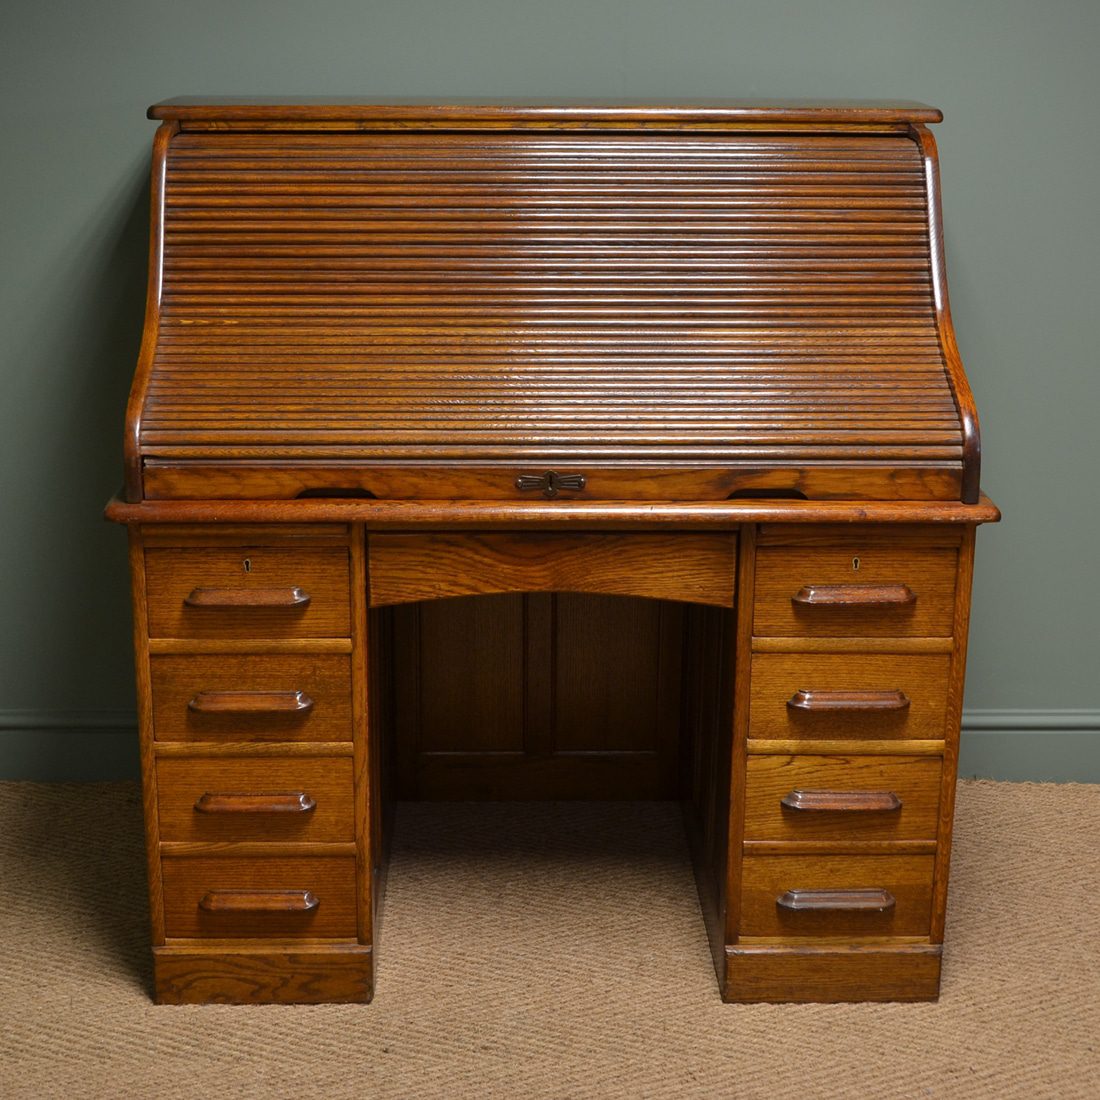 Tall Large Antique Roll Top Desk dates from ca. 1900 and is full of beautiful charm and character